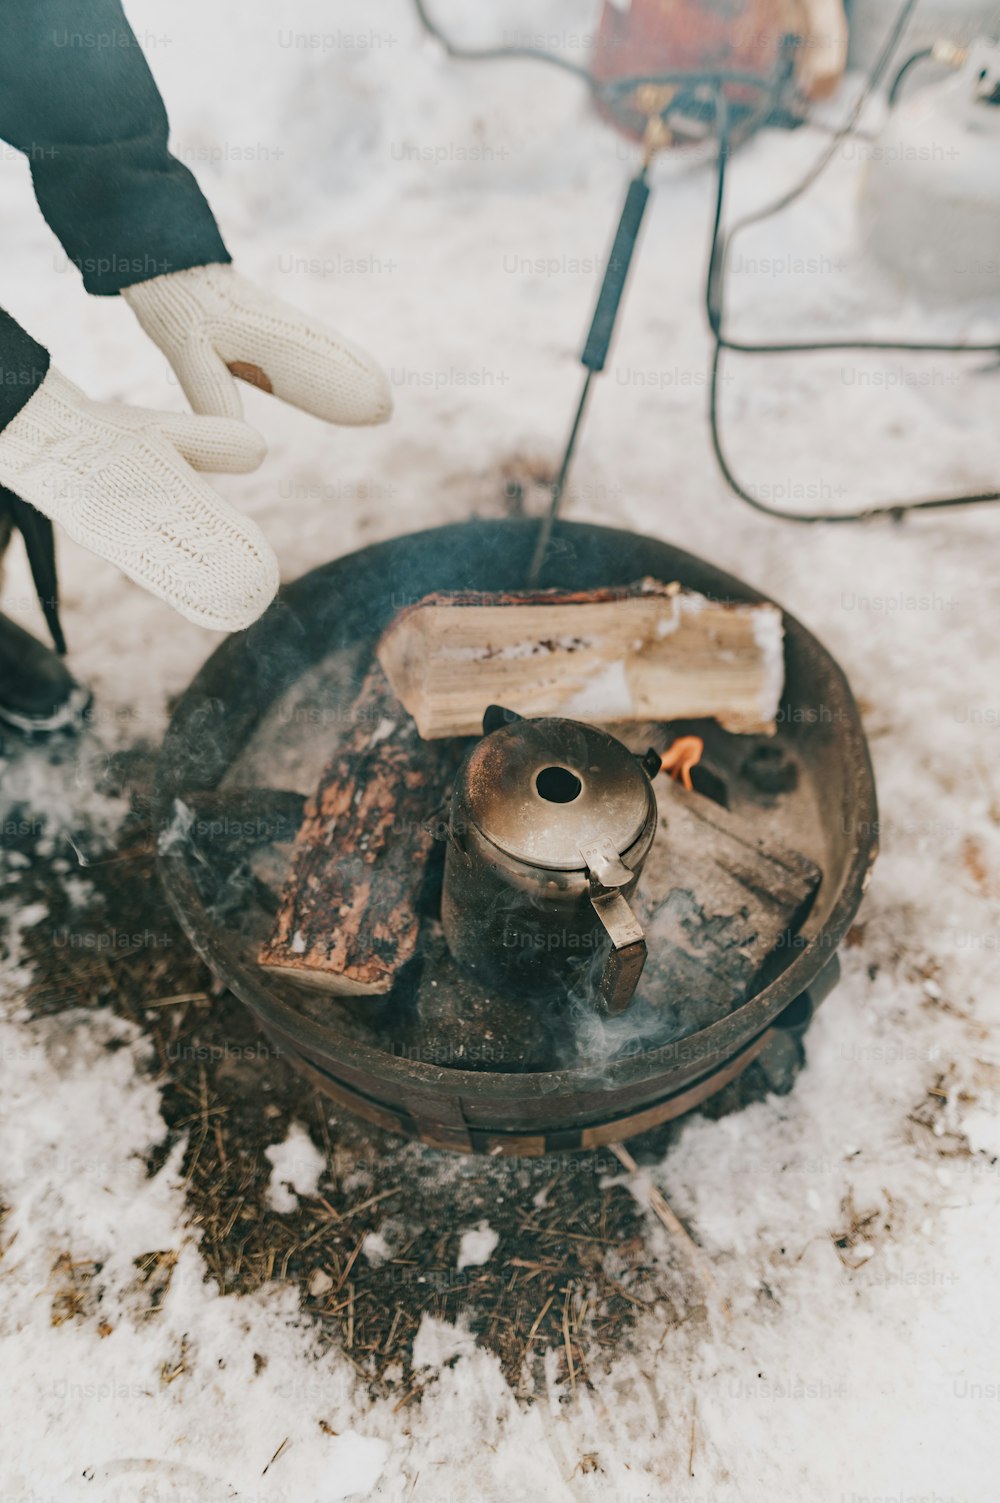 a person is cooking food on a stove in the snow